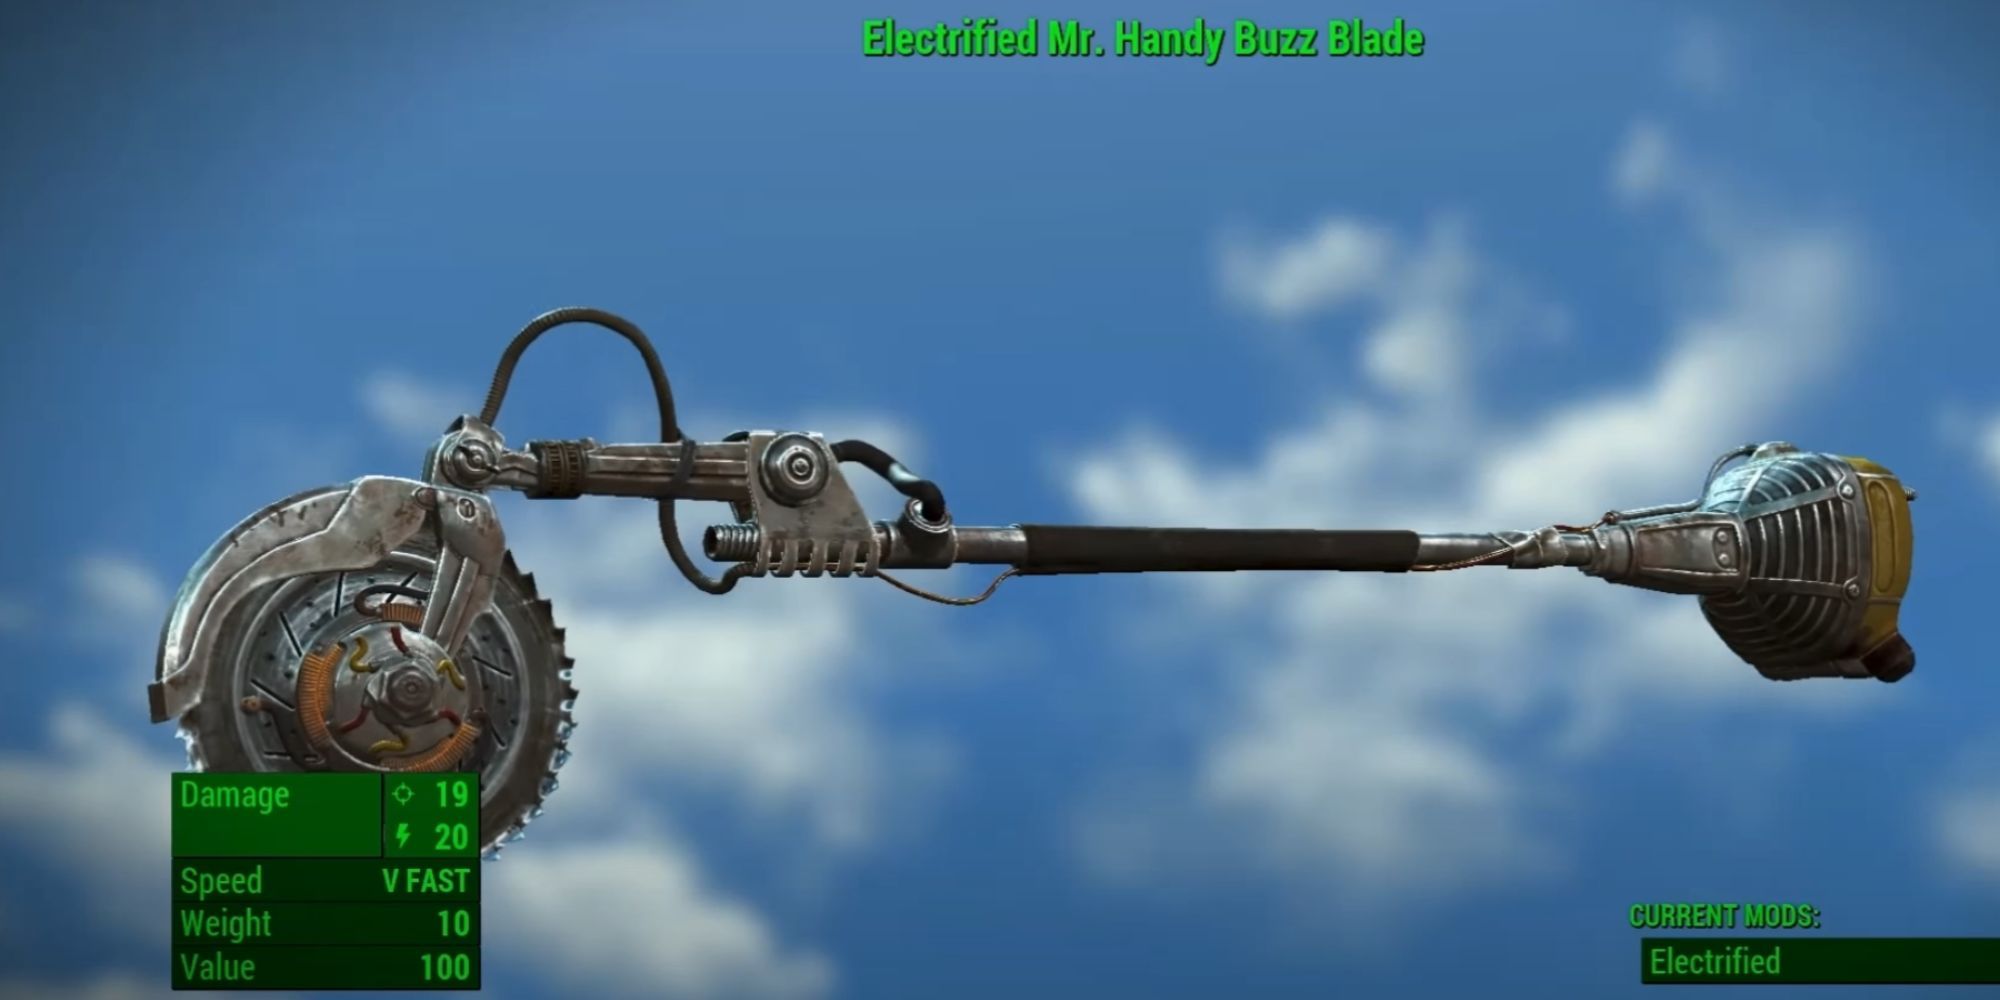 A screenshot showing the stats of the Mr. Handy Buzz Blade weapon.